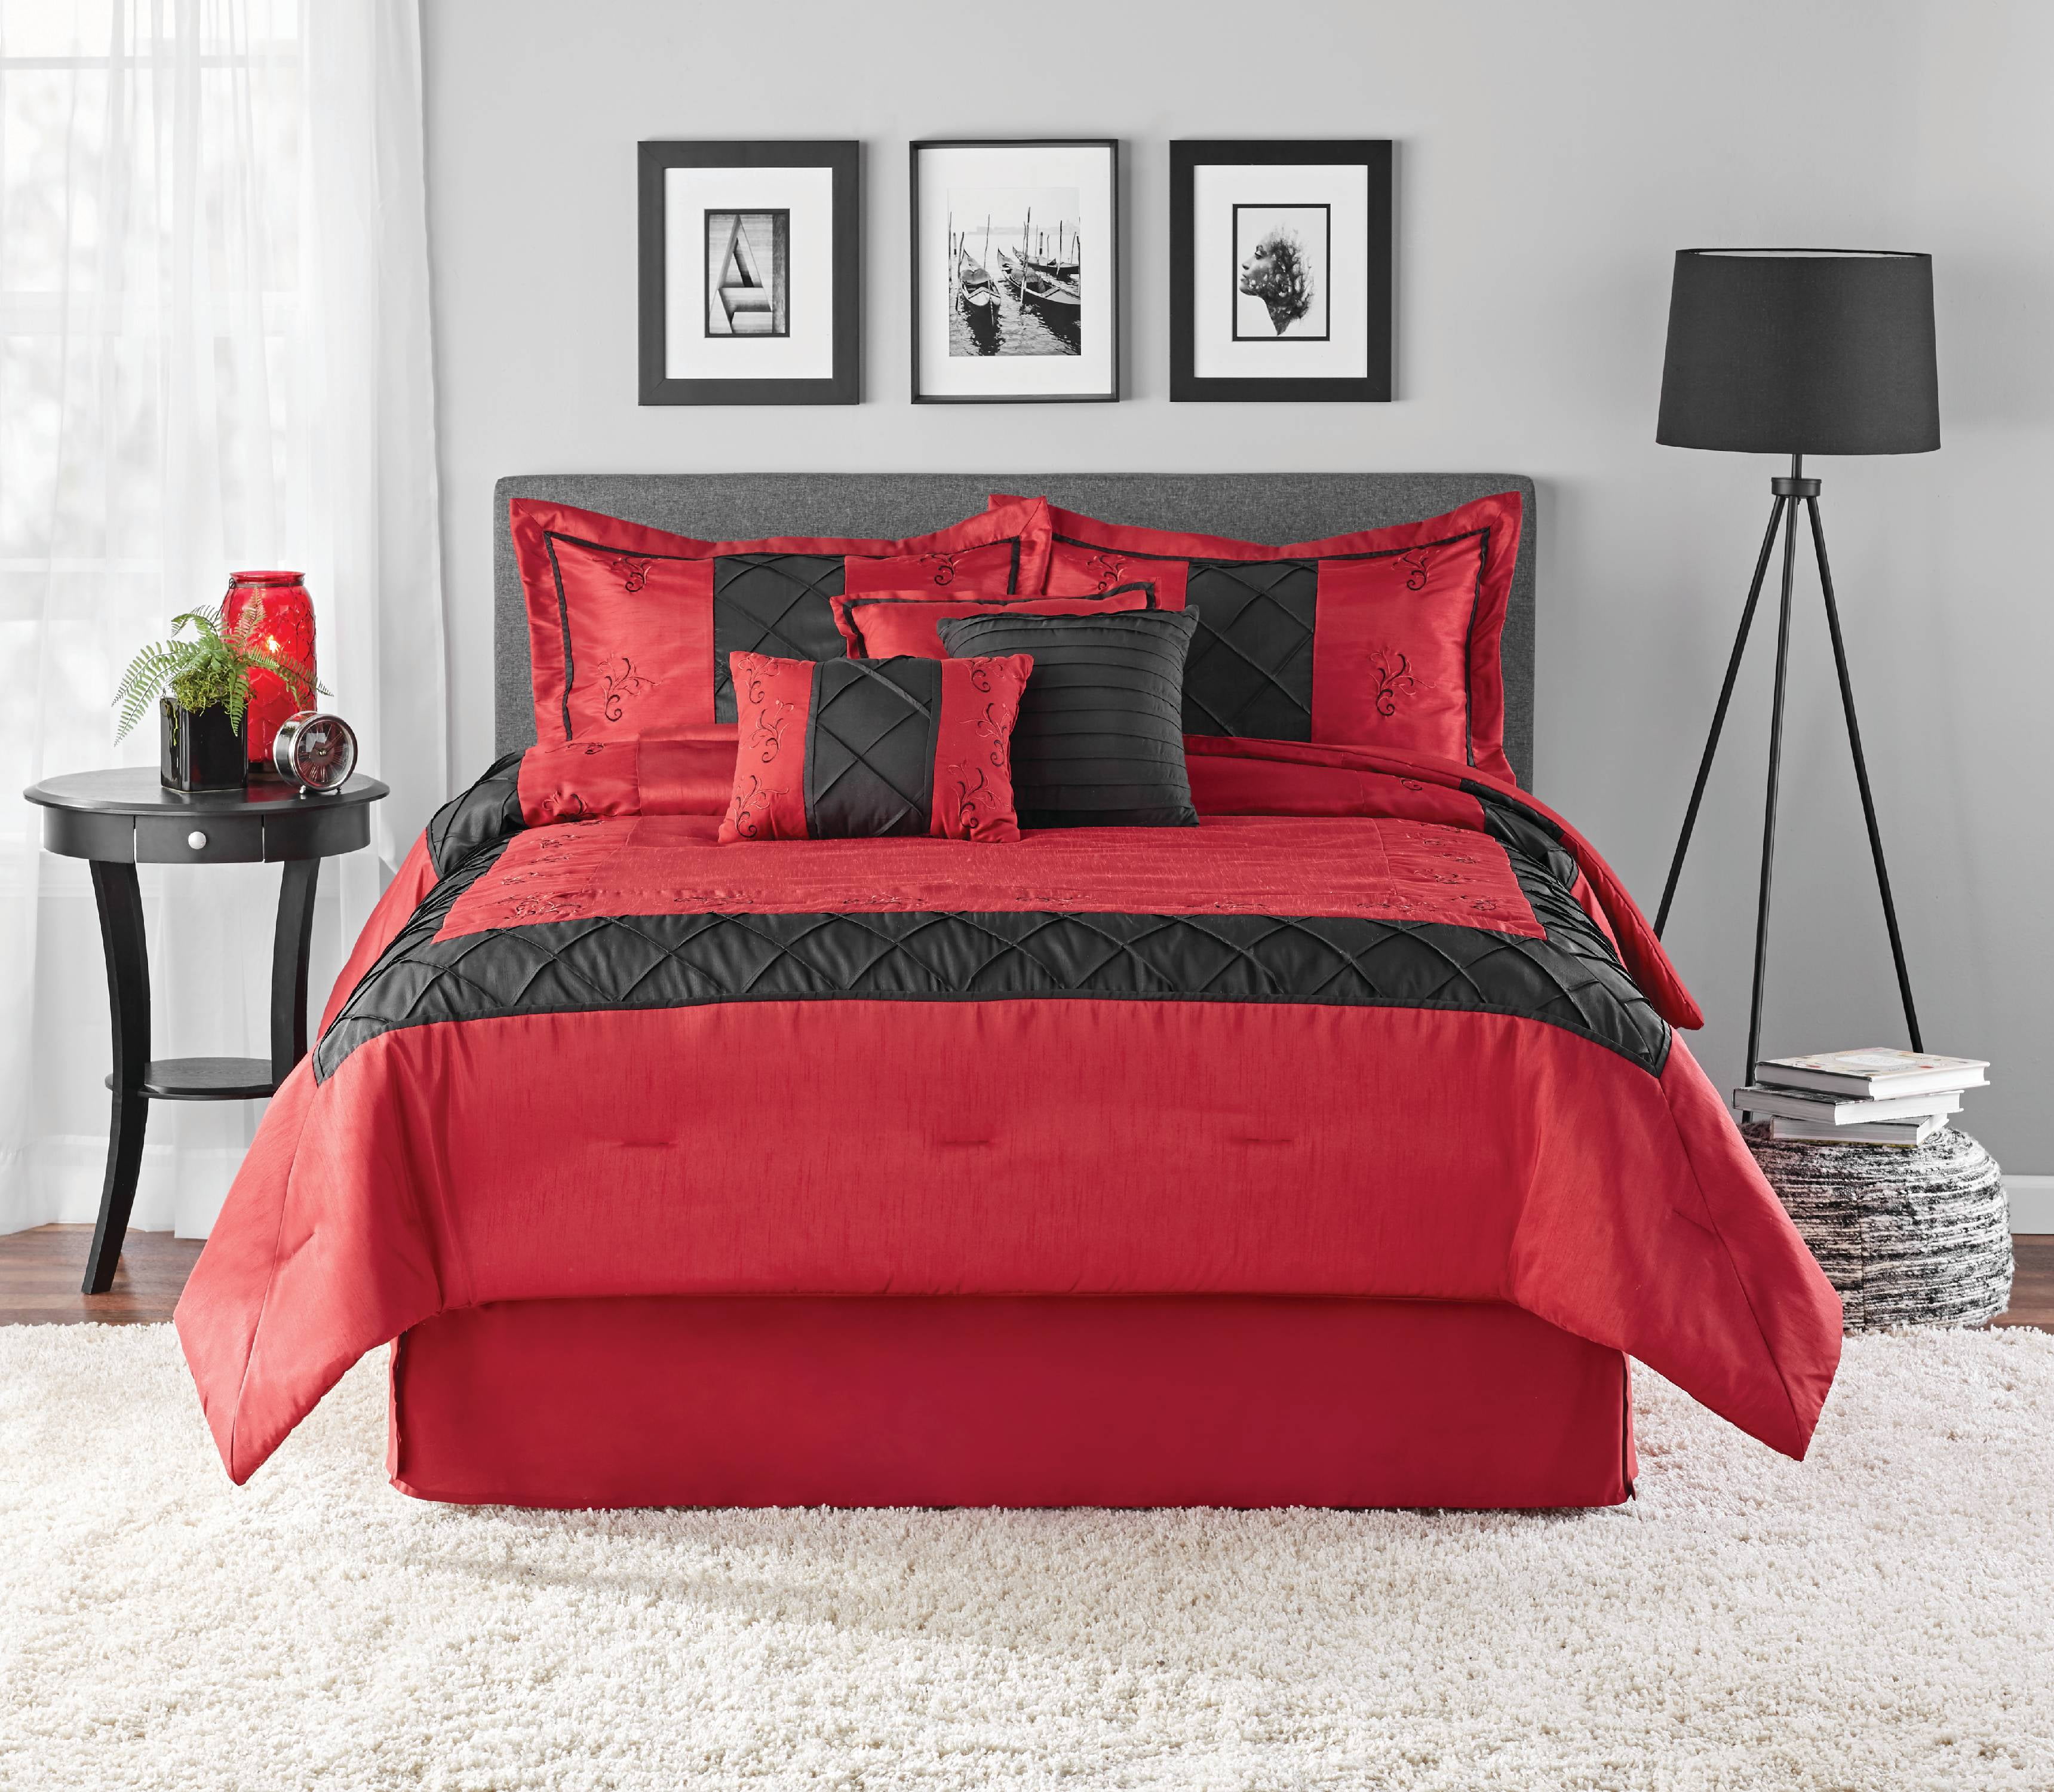 Nanshing Lincoln Comforter Set bed-in-a-bag 7-piece Red/Grey Embriodered 